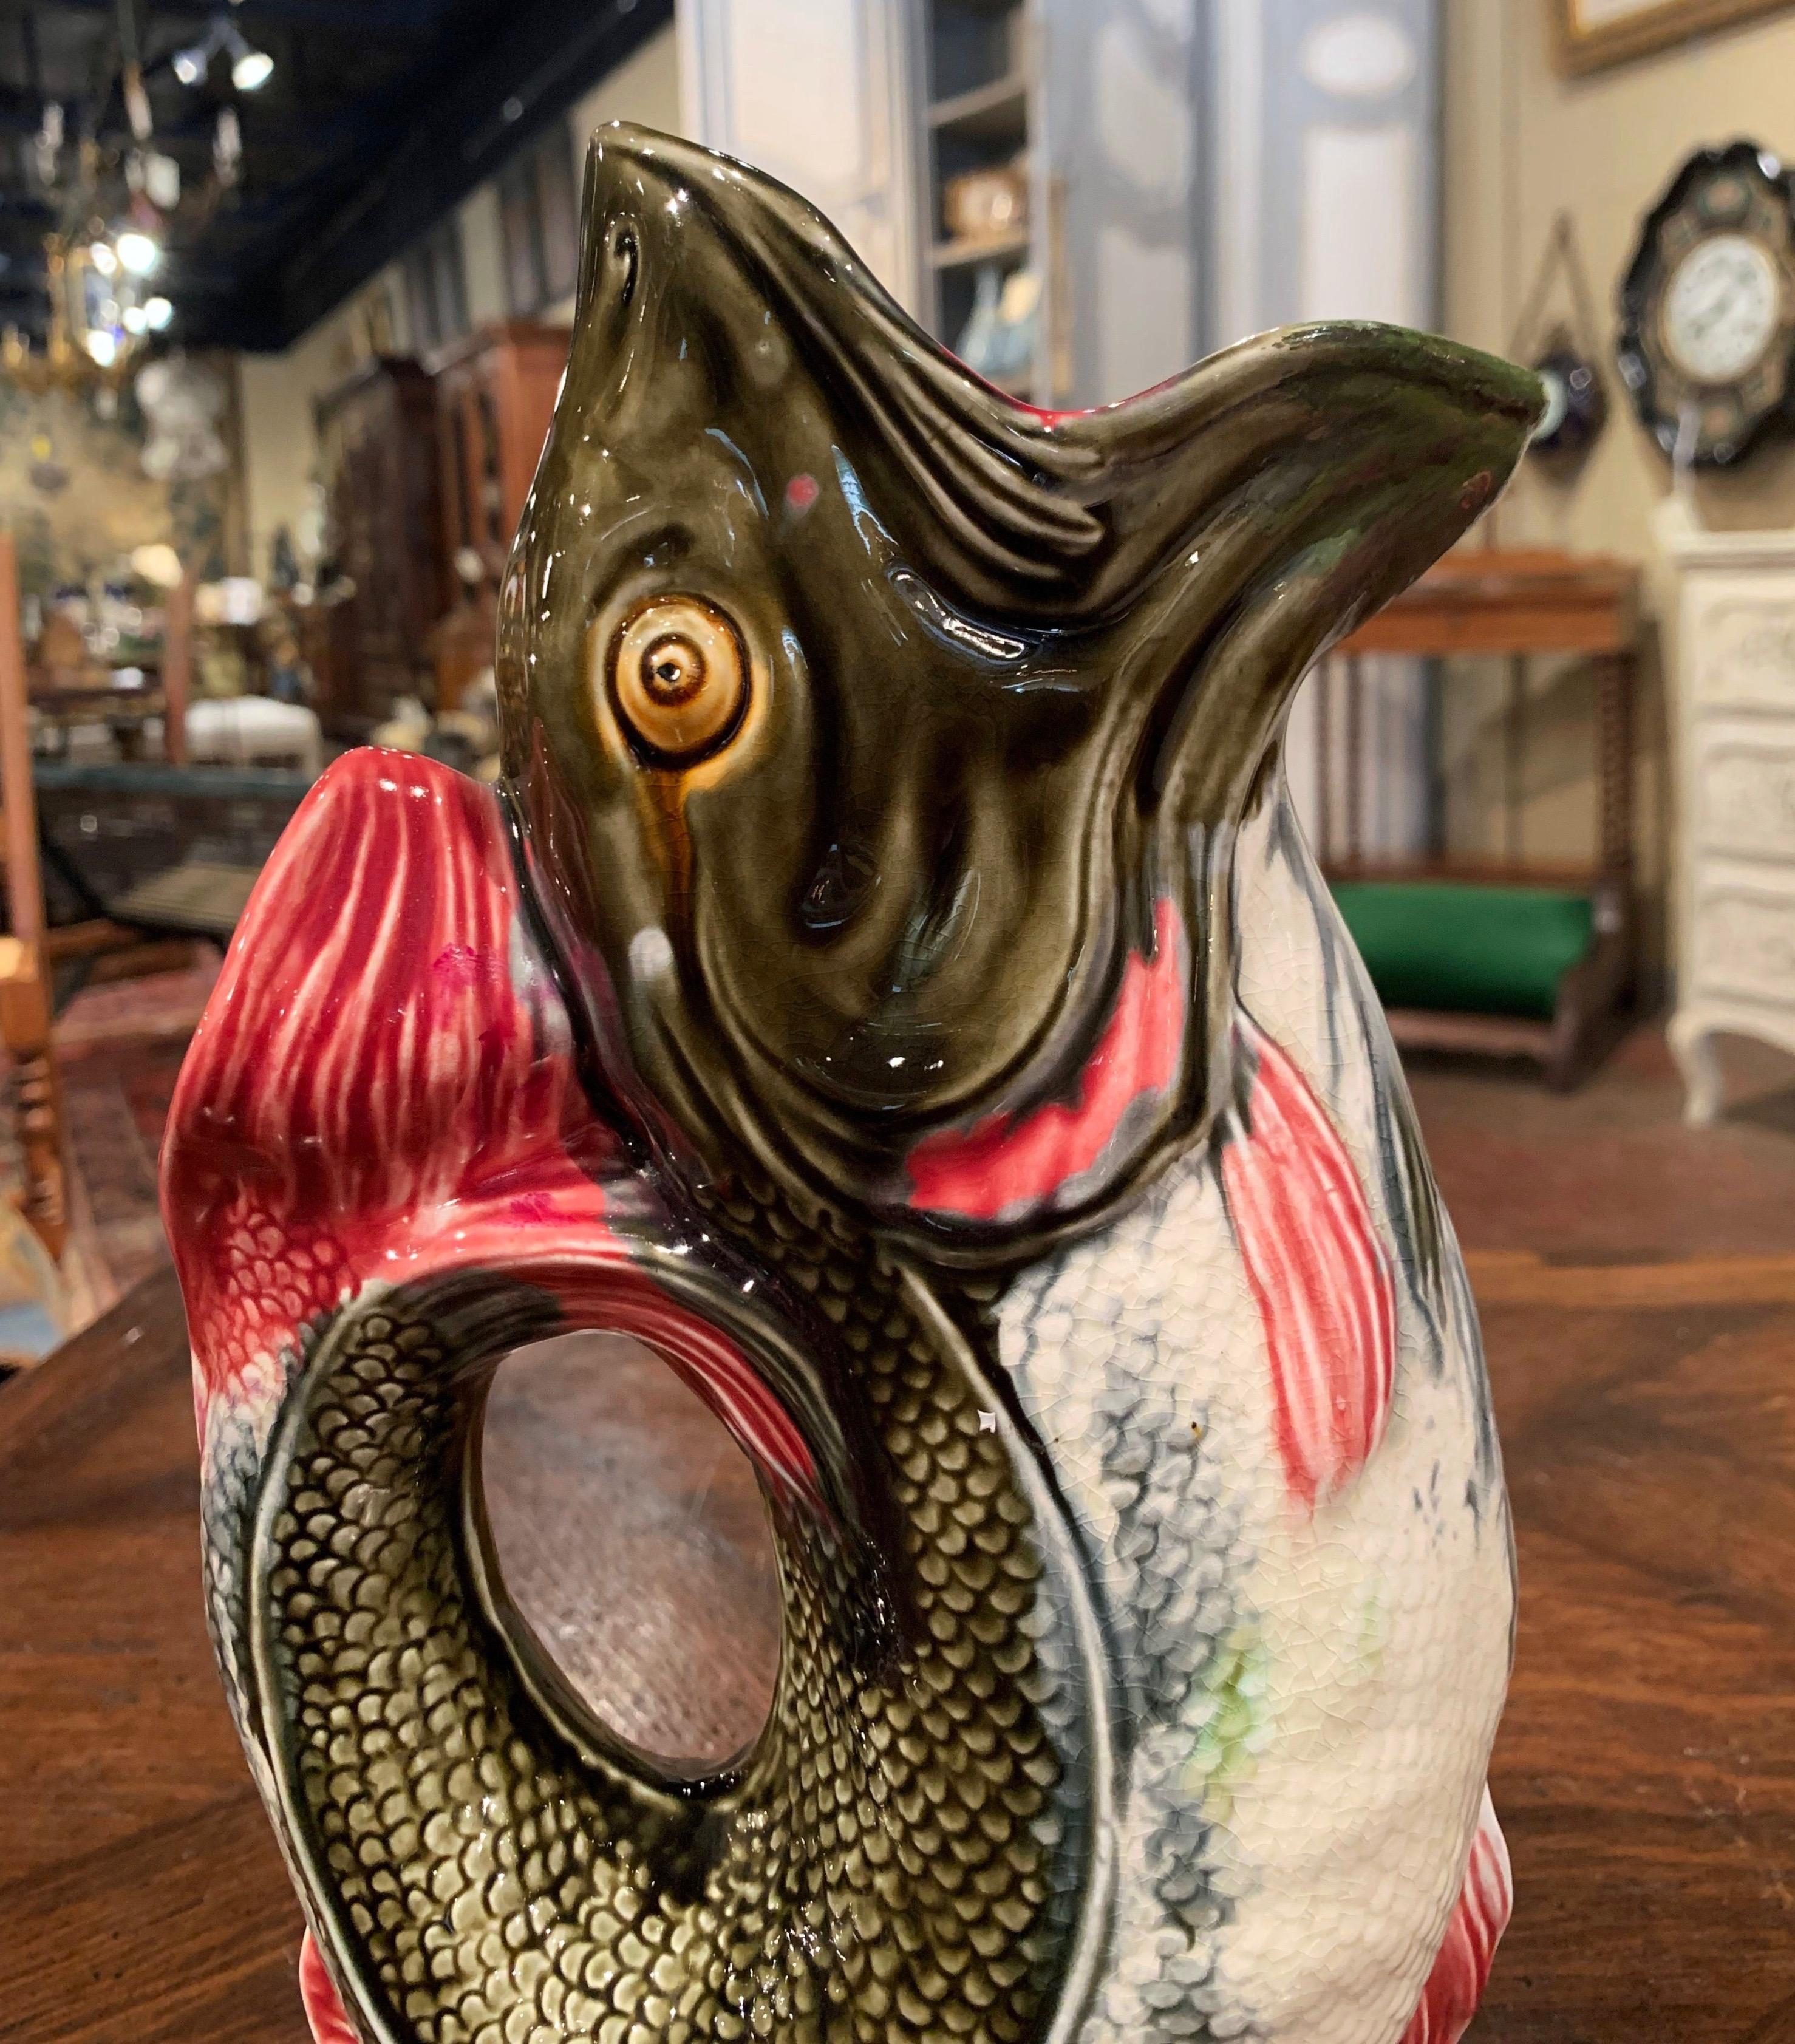 This lively antique pitcher would make an interesting addition to any porcelain collection. The harmonious porcelain jug was sculpted in France, circa 1890 and is in the shape of a colorful fish in a standing position with a wide open mouth; called